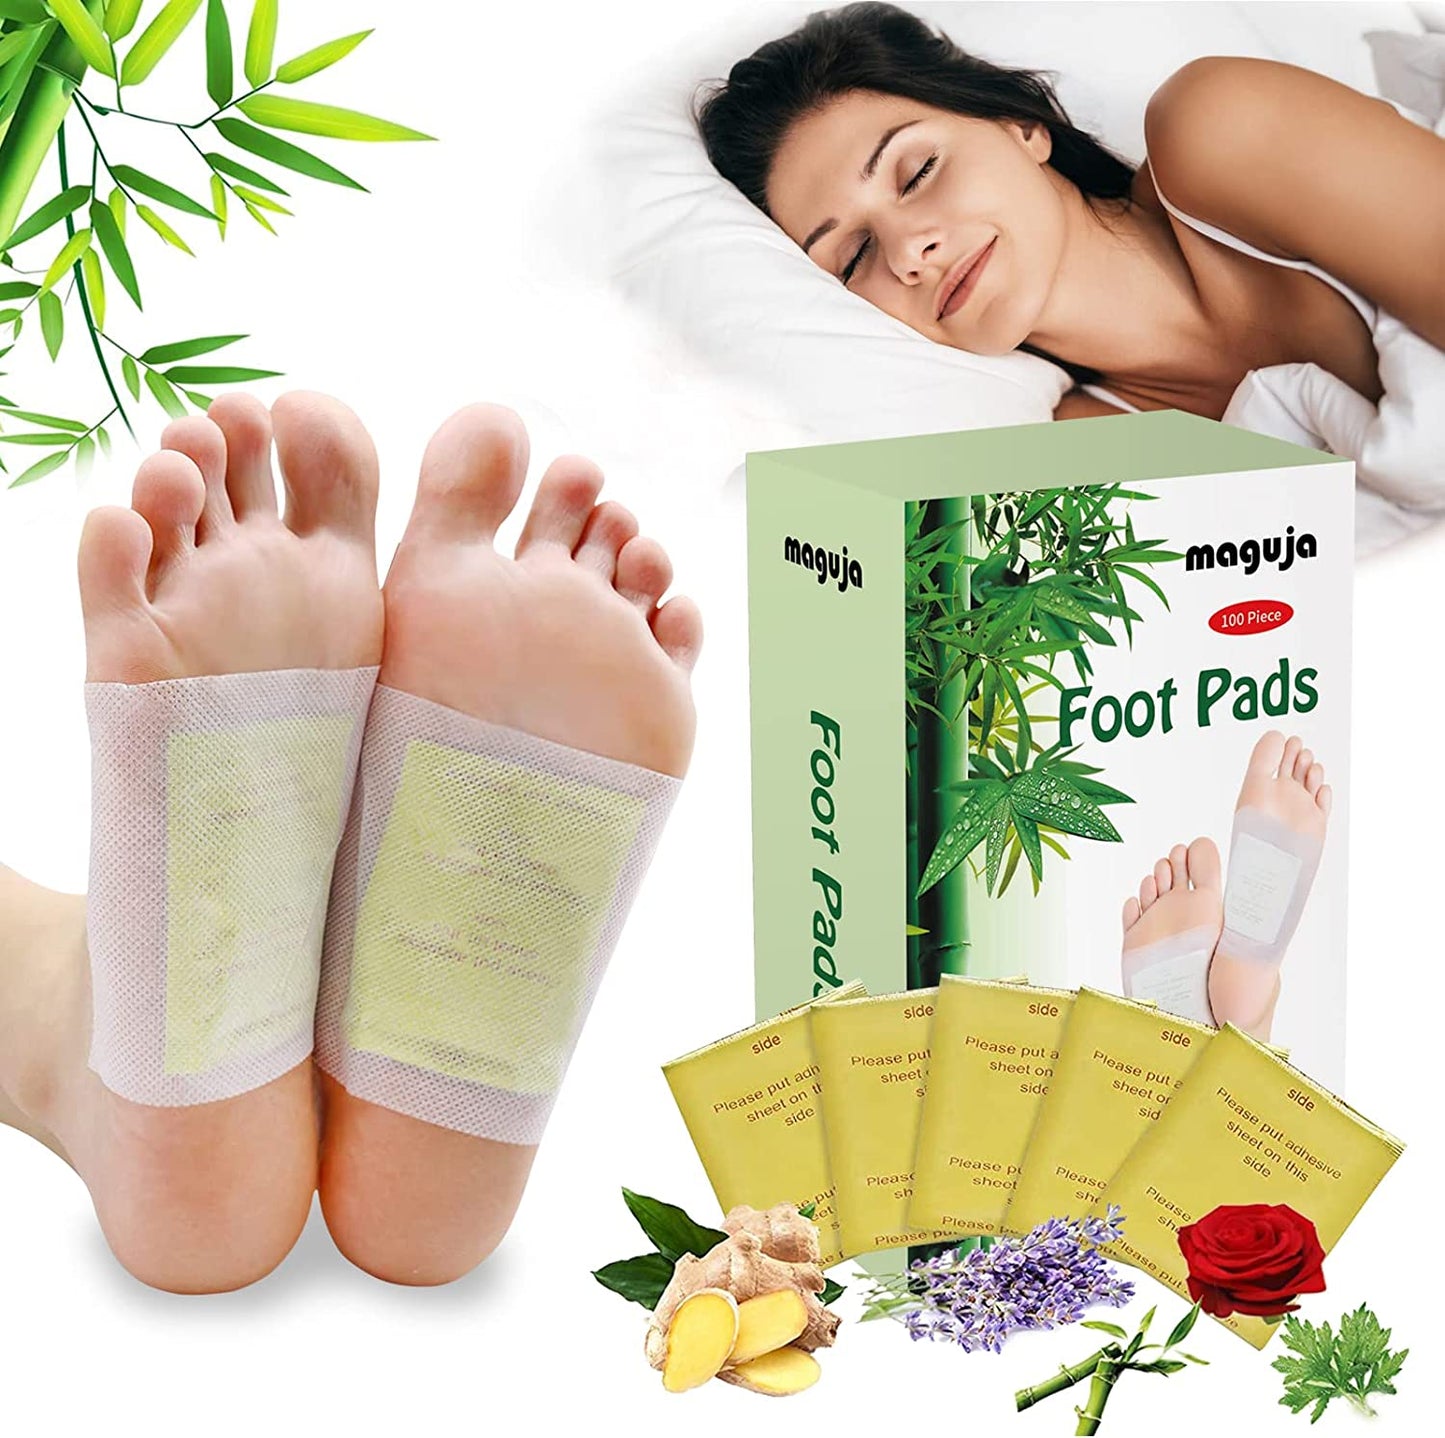 Organic Foot Pads Natural Ginger Ingredients Foot & Body Care